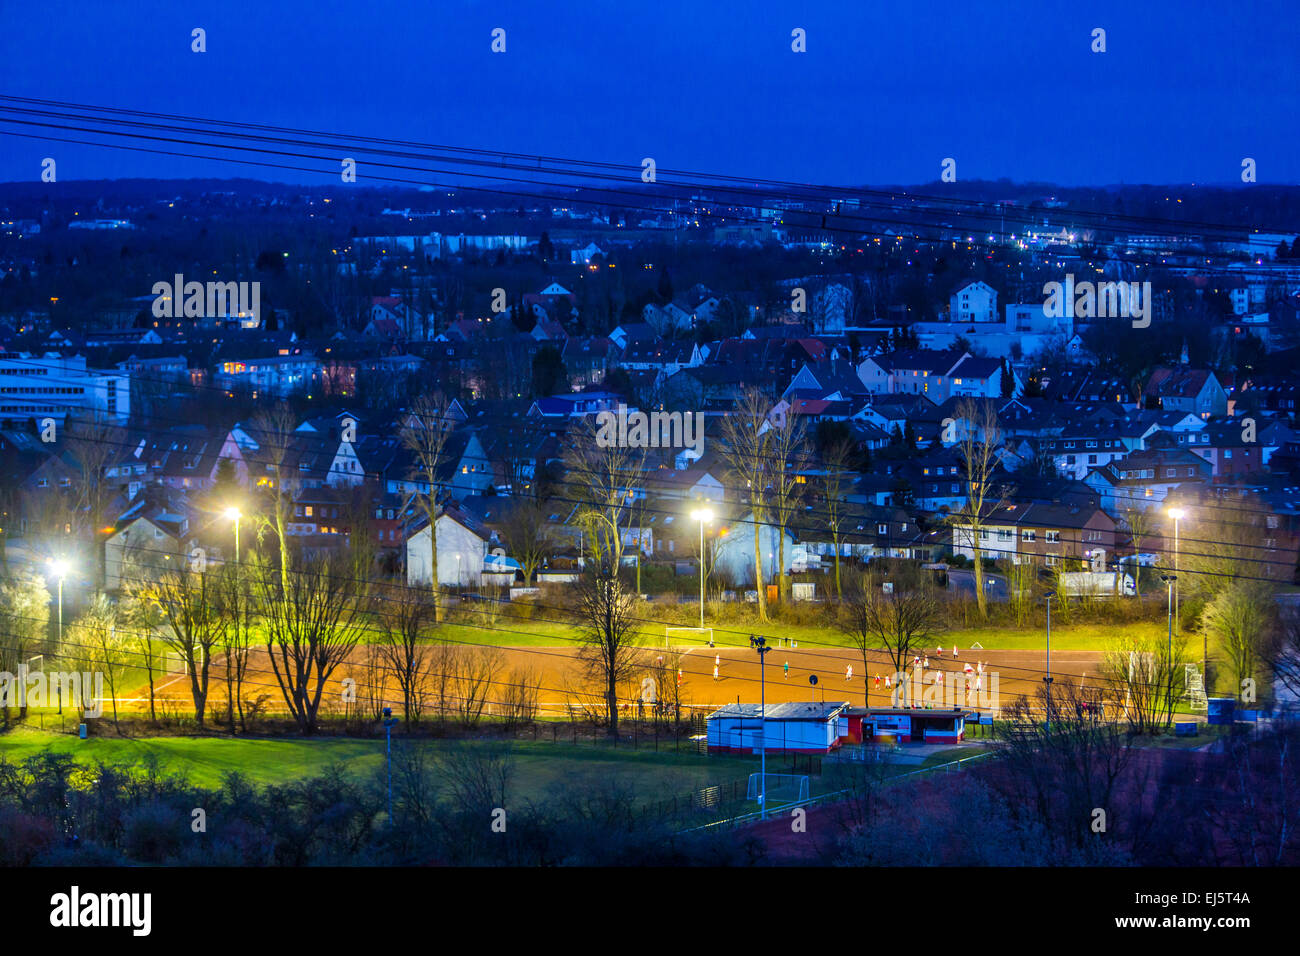 Local sports ground, illuminated in the evening Stock Photo